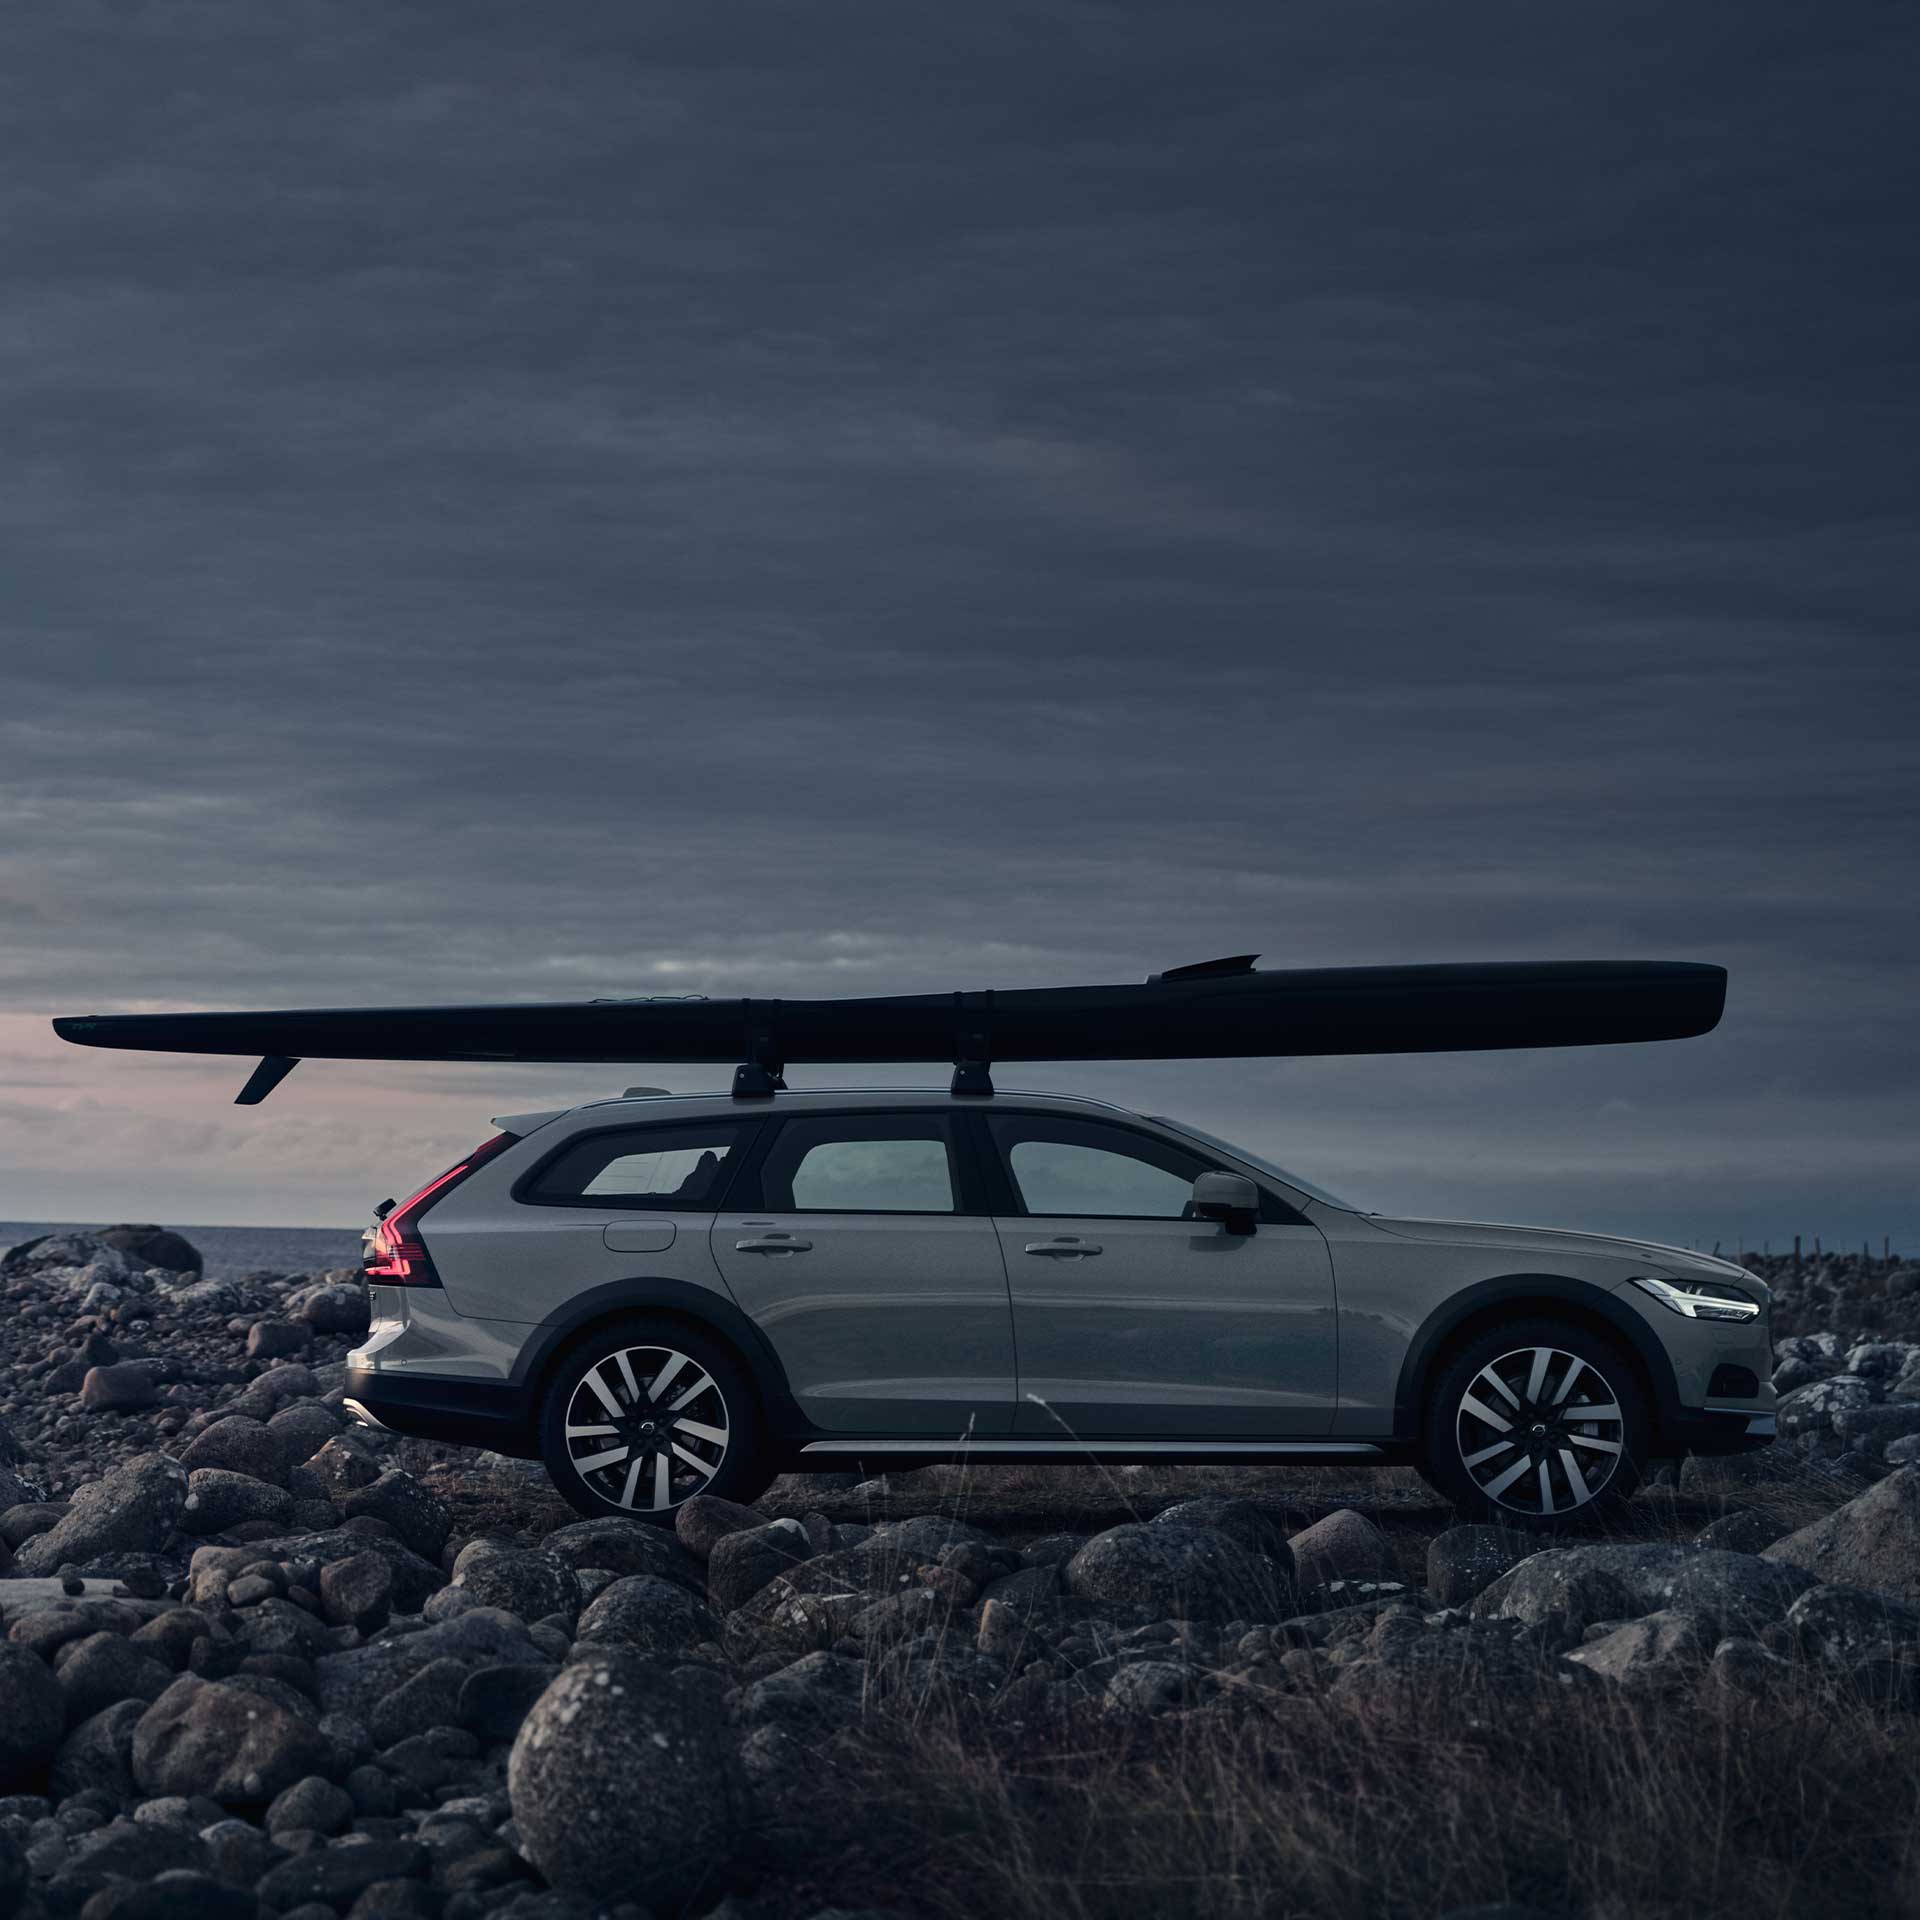 A Volvo V90 Cross Country with lifestyle accessories to carry your gear.